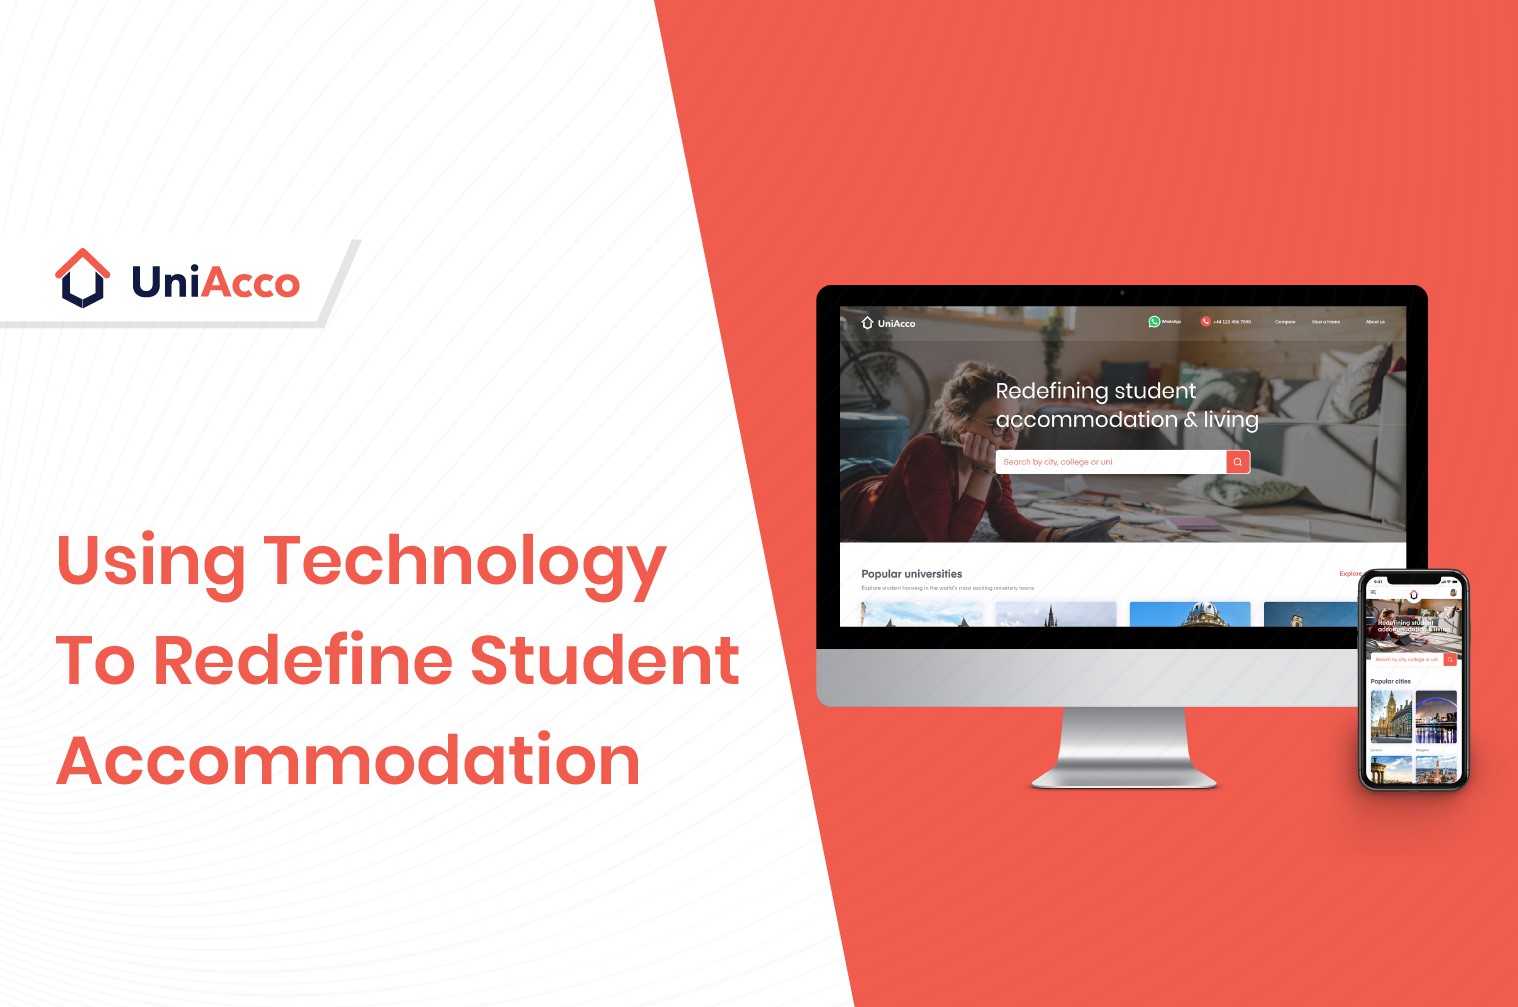 Use Of Technology By UniAcco To Change The Student Accommodation Landscape